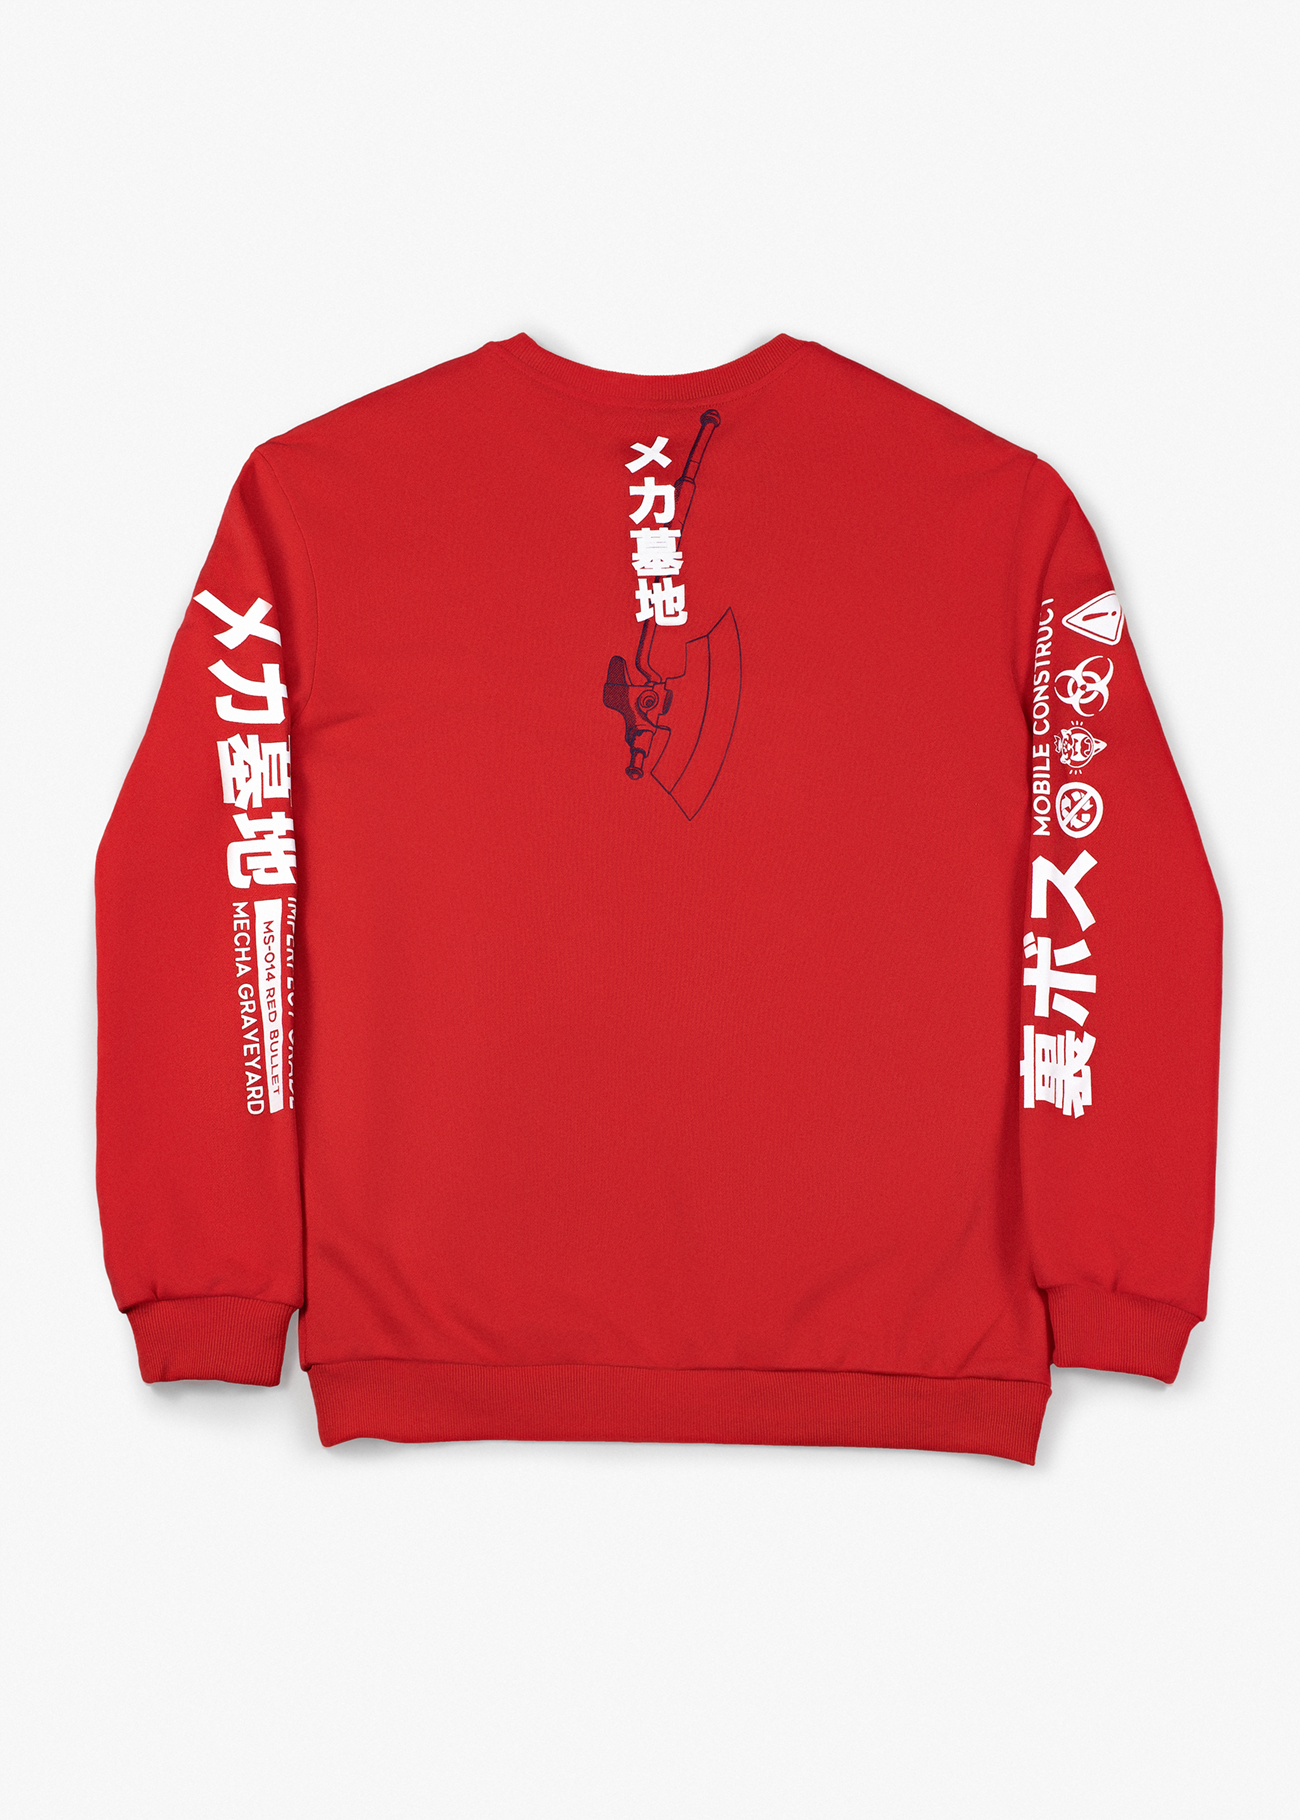 Photo of the back of Red sweater with a mecha anime design on the front in screen print, inspired anime clothing